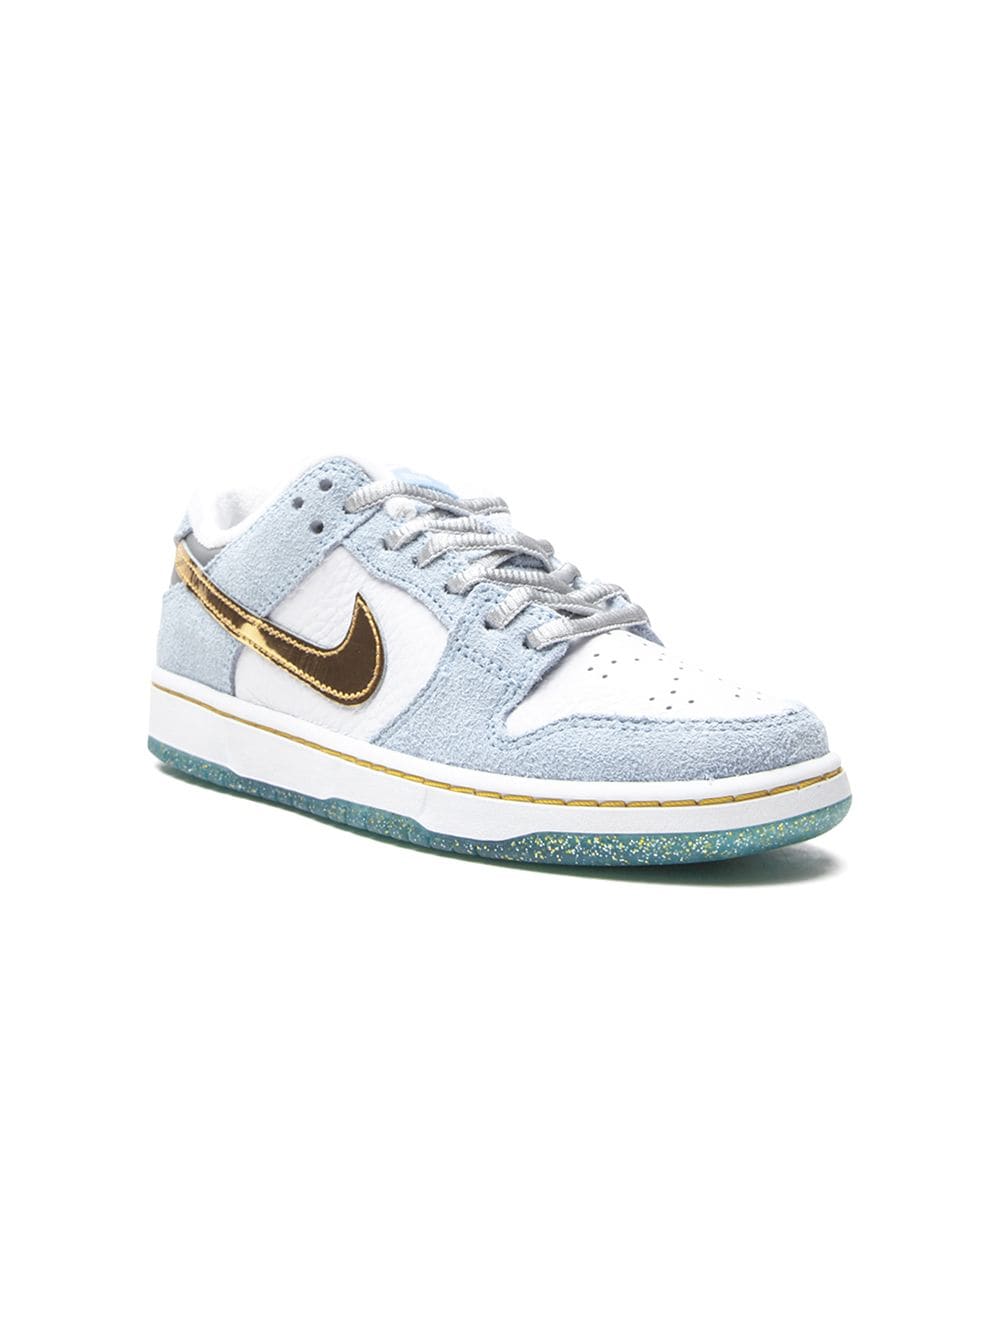 Nike Kids x Sean Cliver SB Dunk Low "Holiday Special" sneakers - Blue von Nike Kids